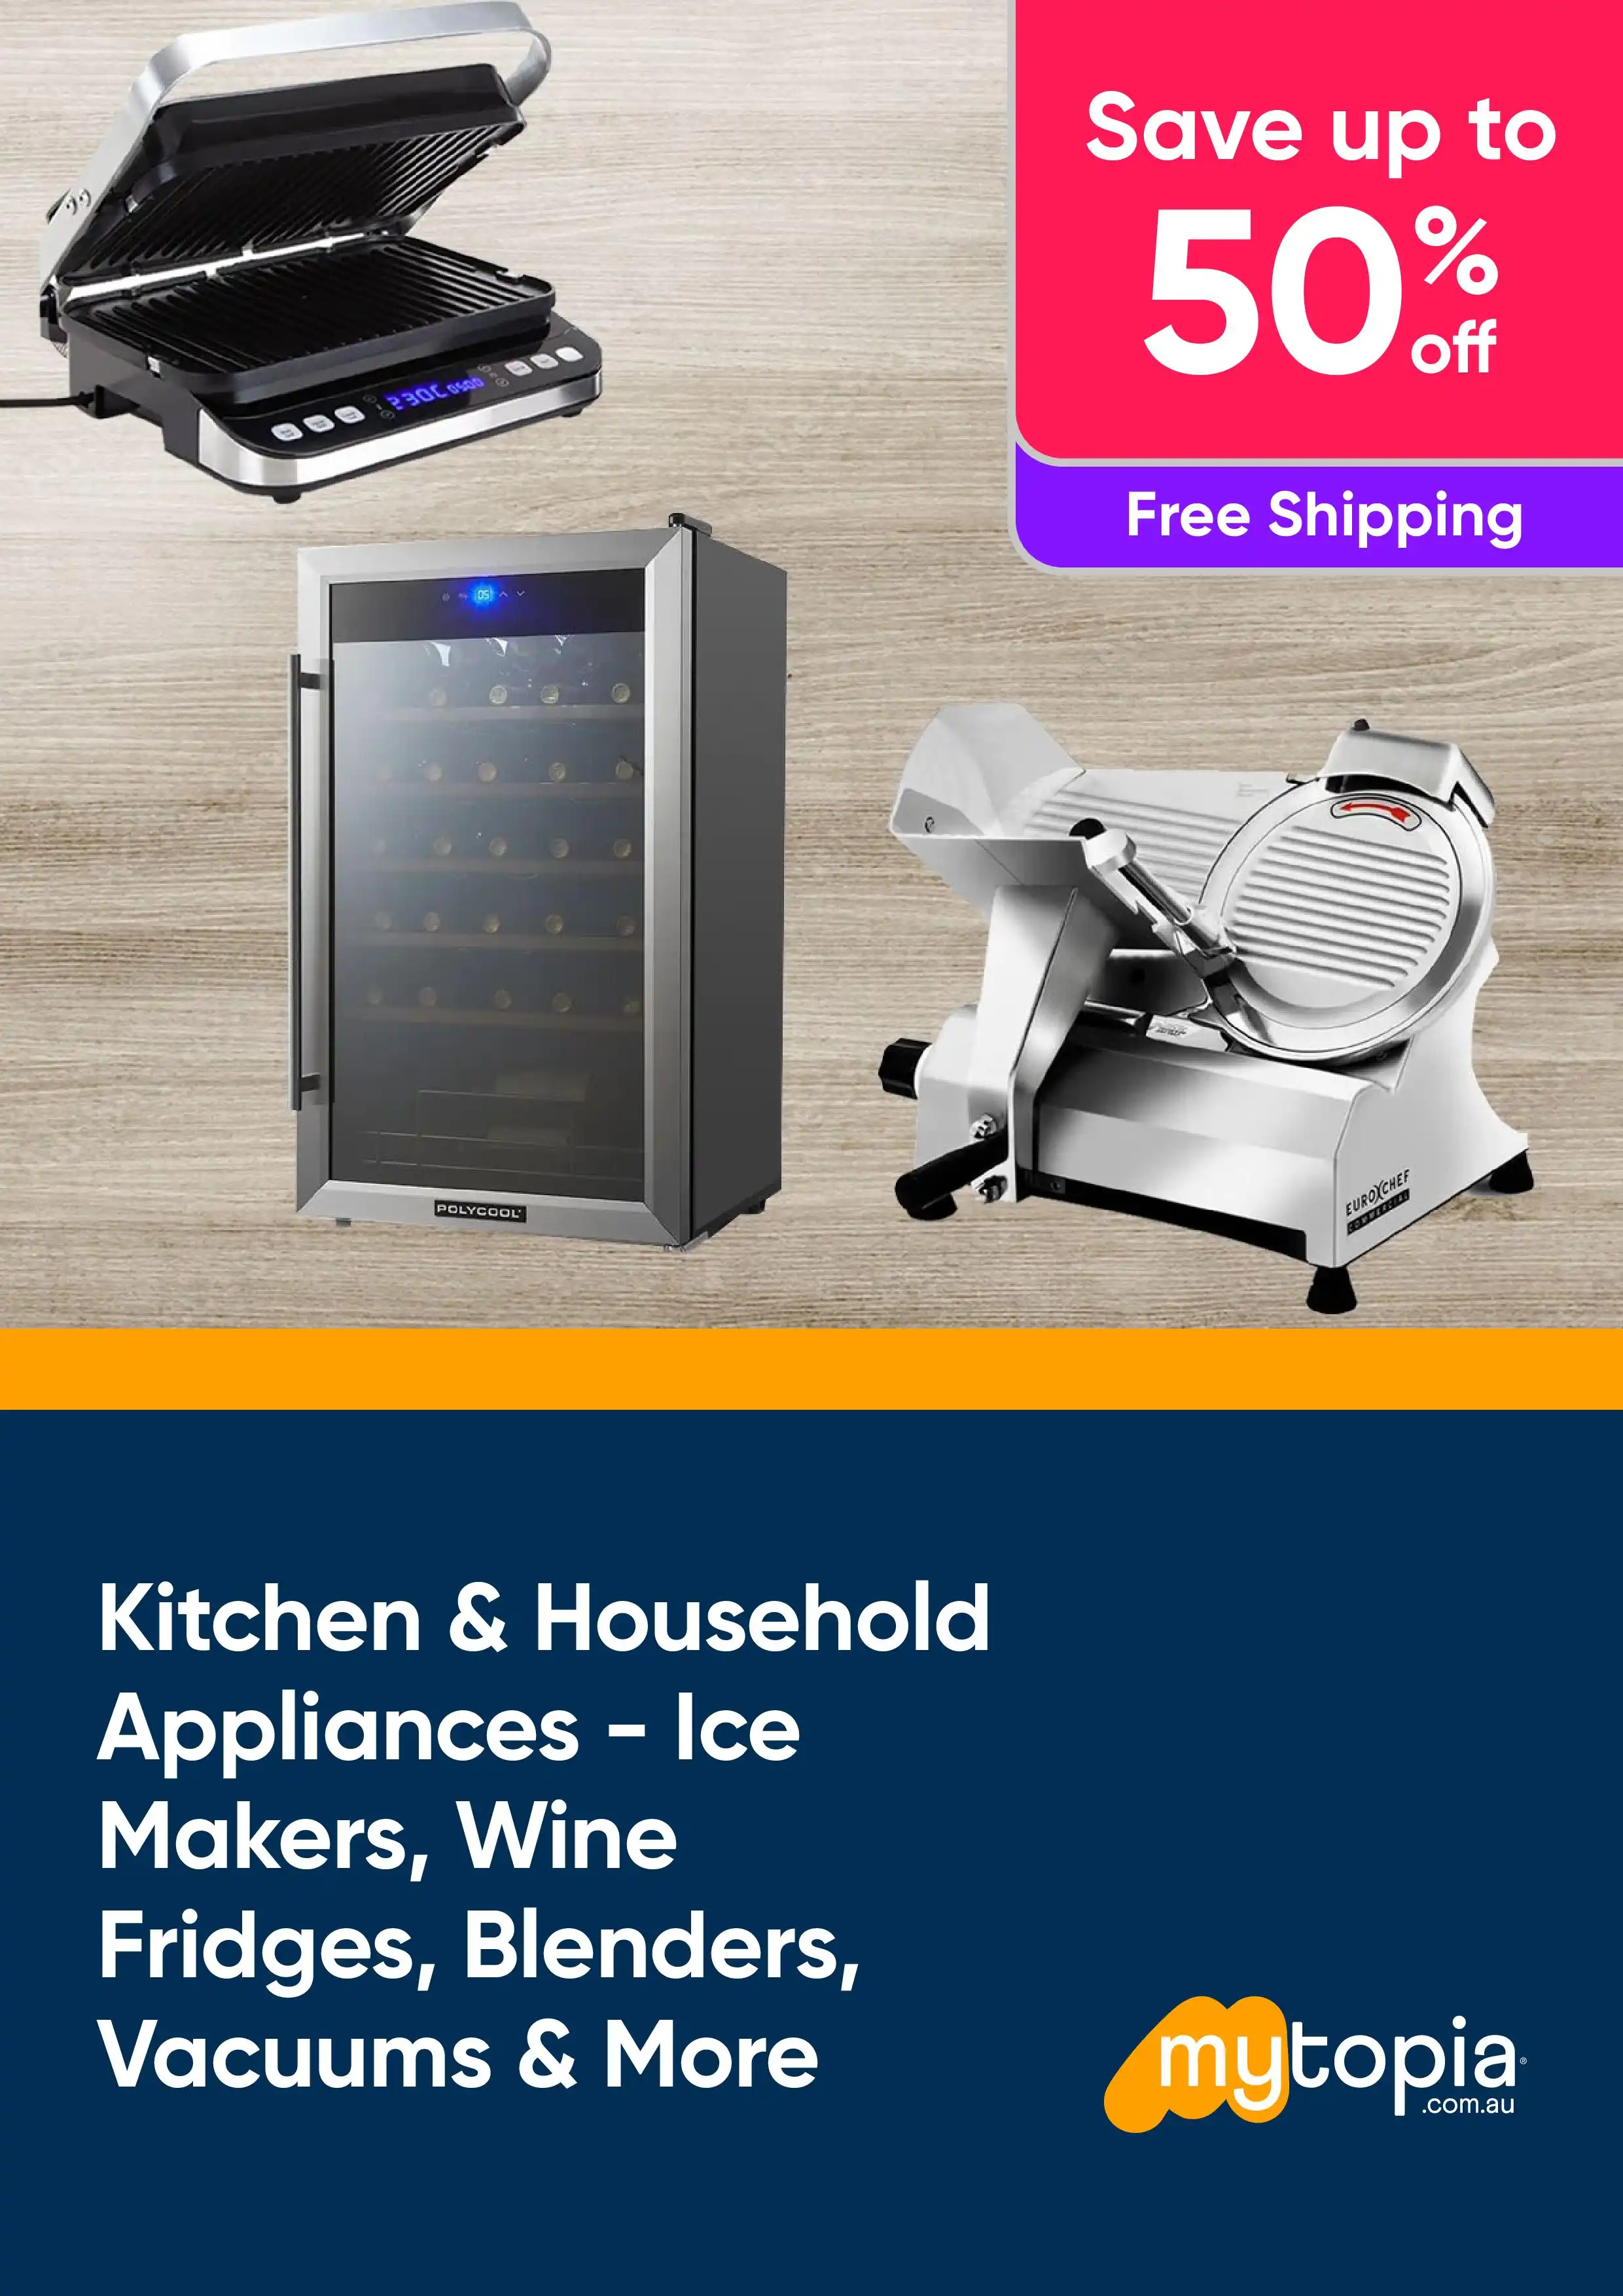 Kitchen & Household Appliances - Ice Makers, Wine Fridges, Refrigerators, Blenders, Vacuums and More - Save Up to 50% Off